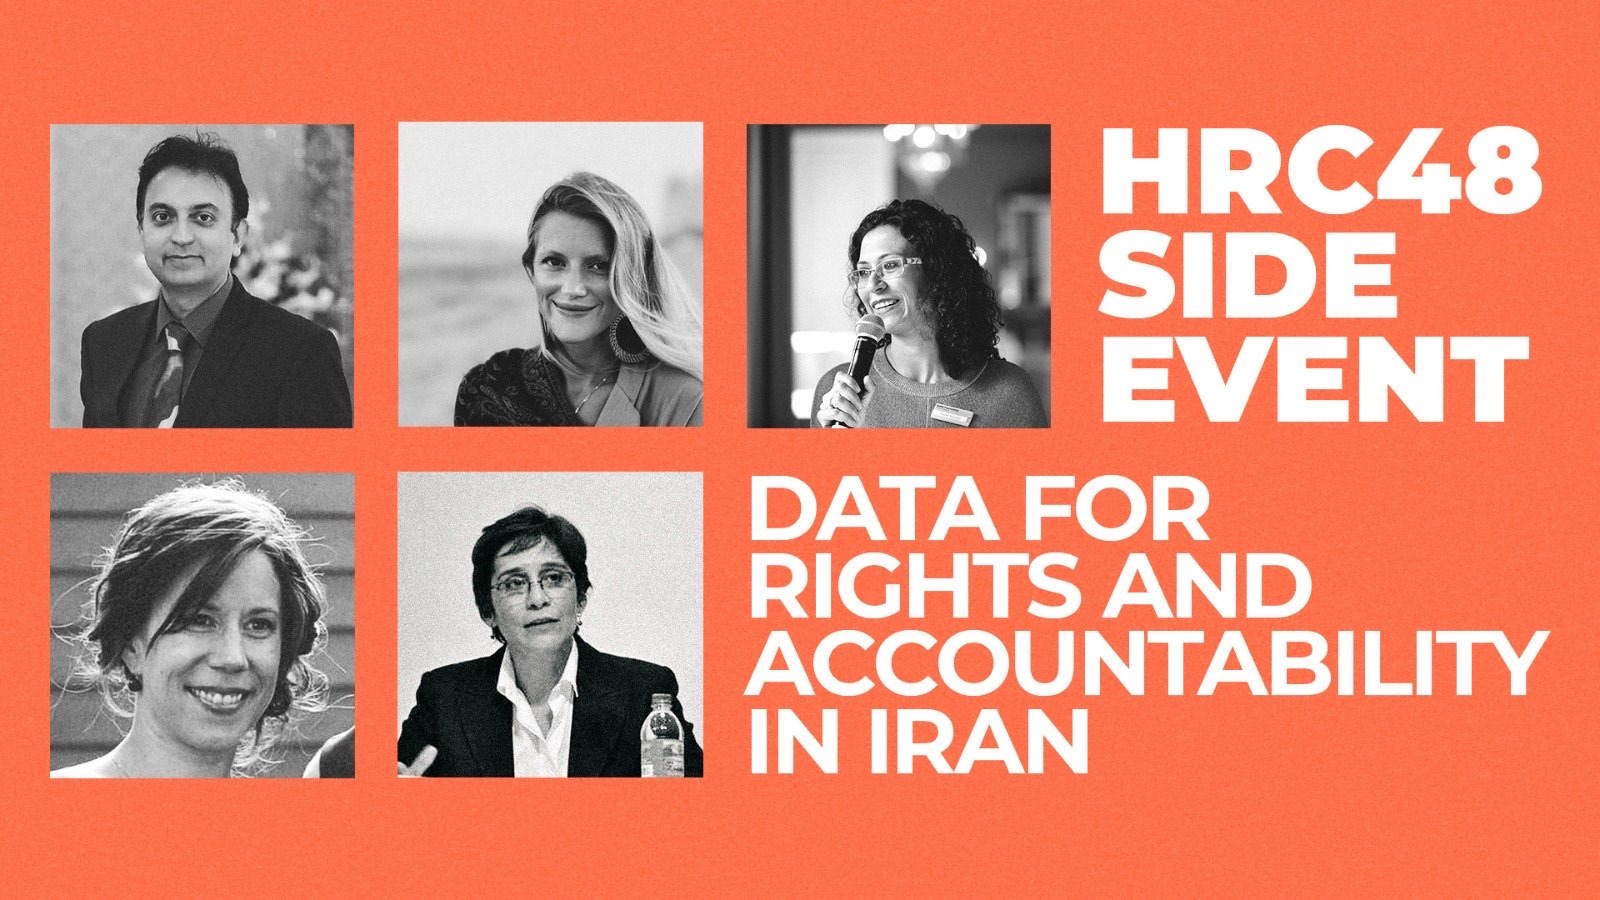 HRA Presents Spreading Justice at HRC48 Side-Event